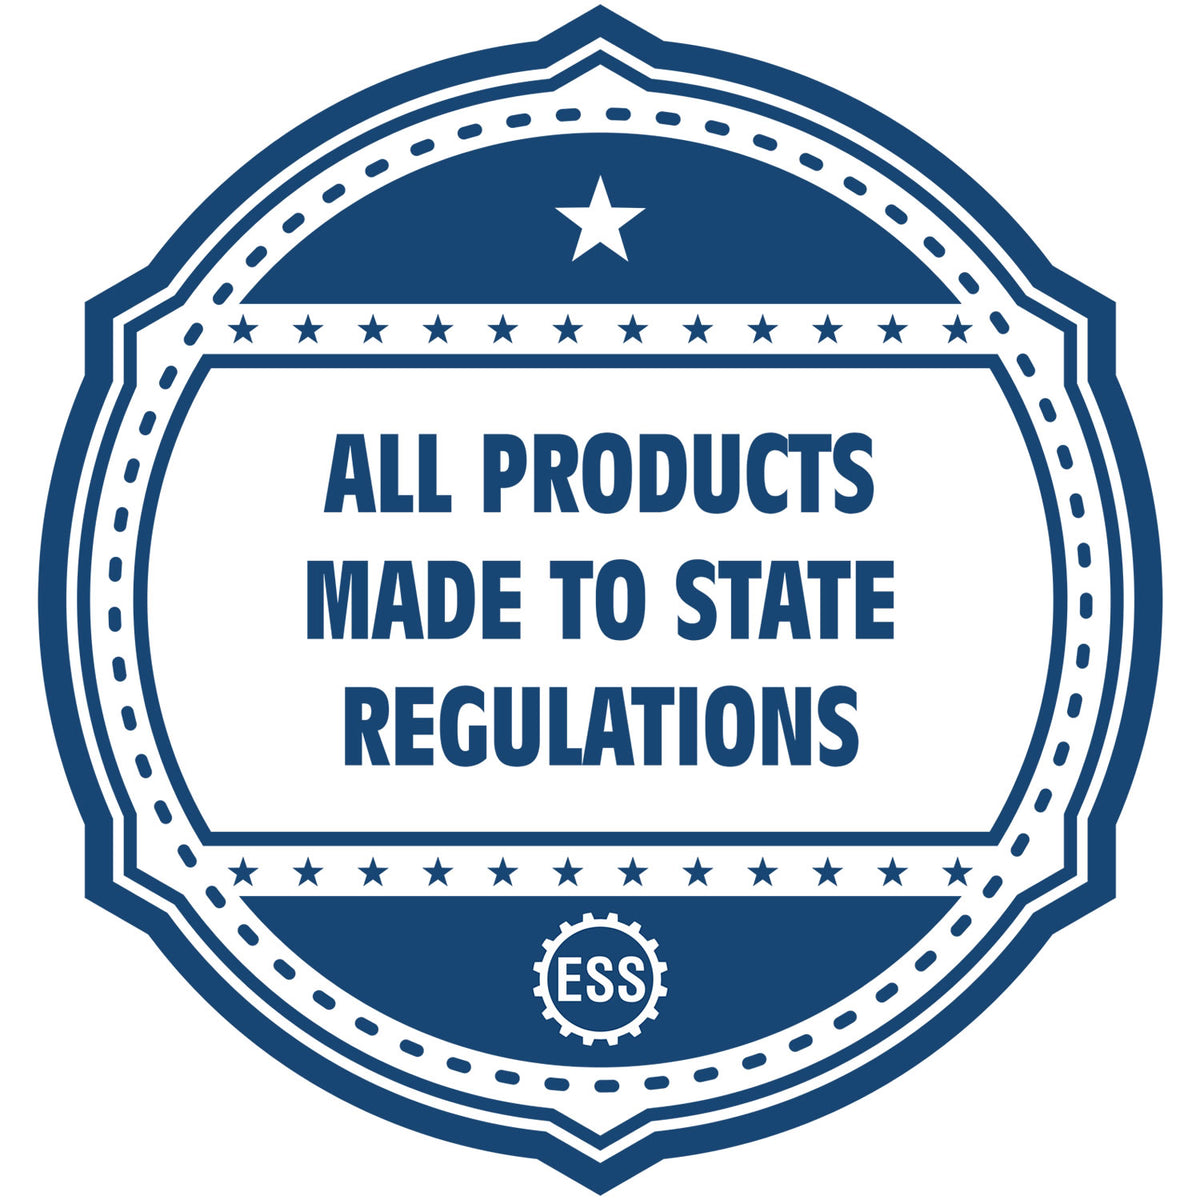 An icon or badge element for the Alabama Professional Engineer Seal Stamp showing that this product is made in compliance with state regulations.